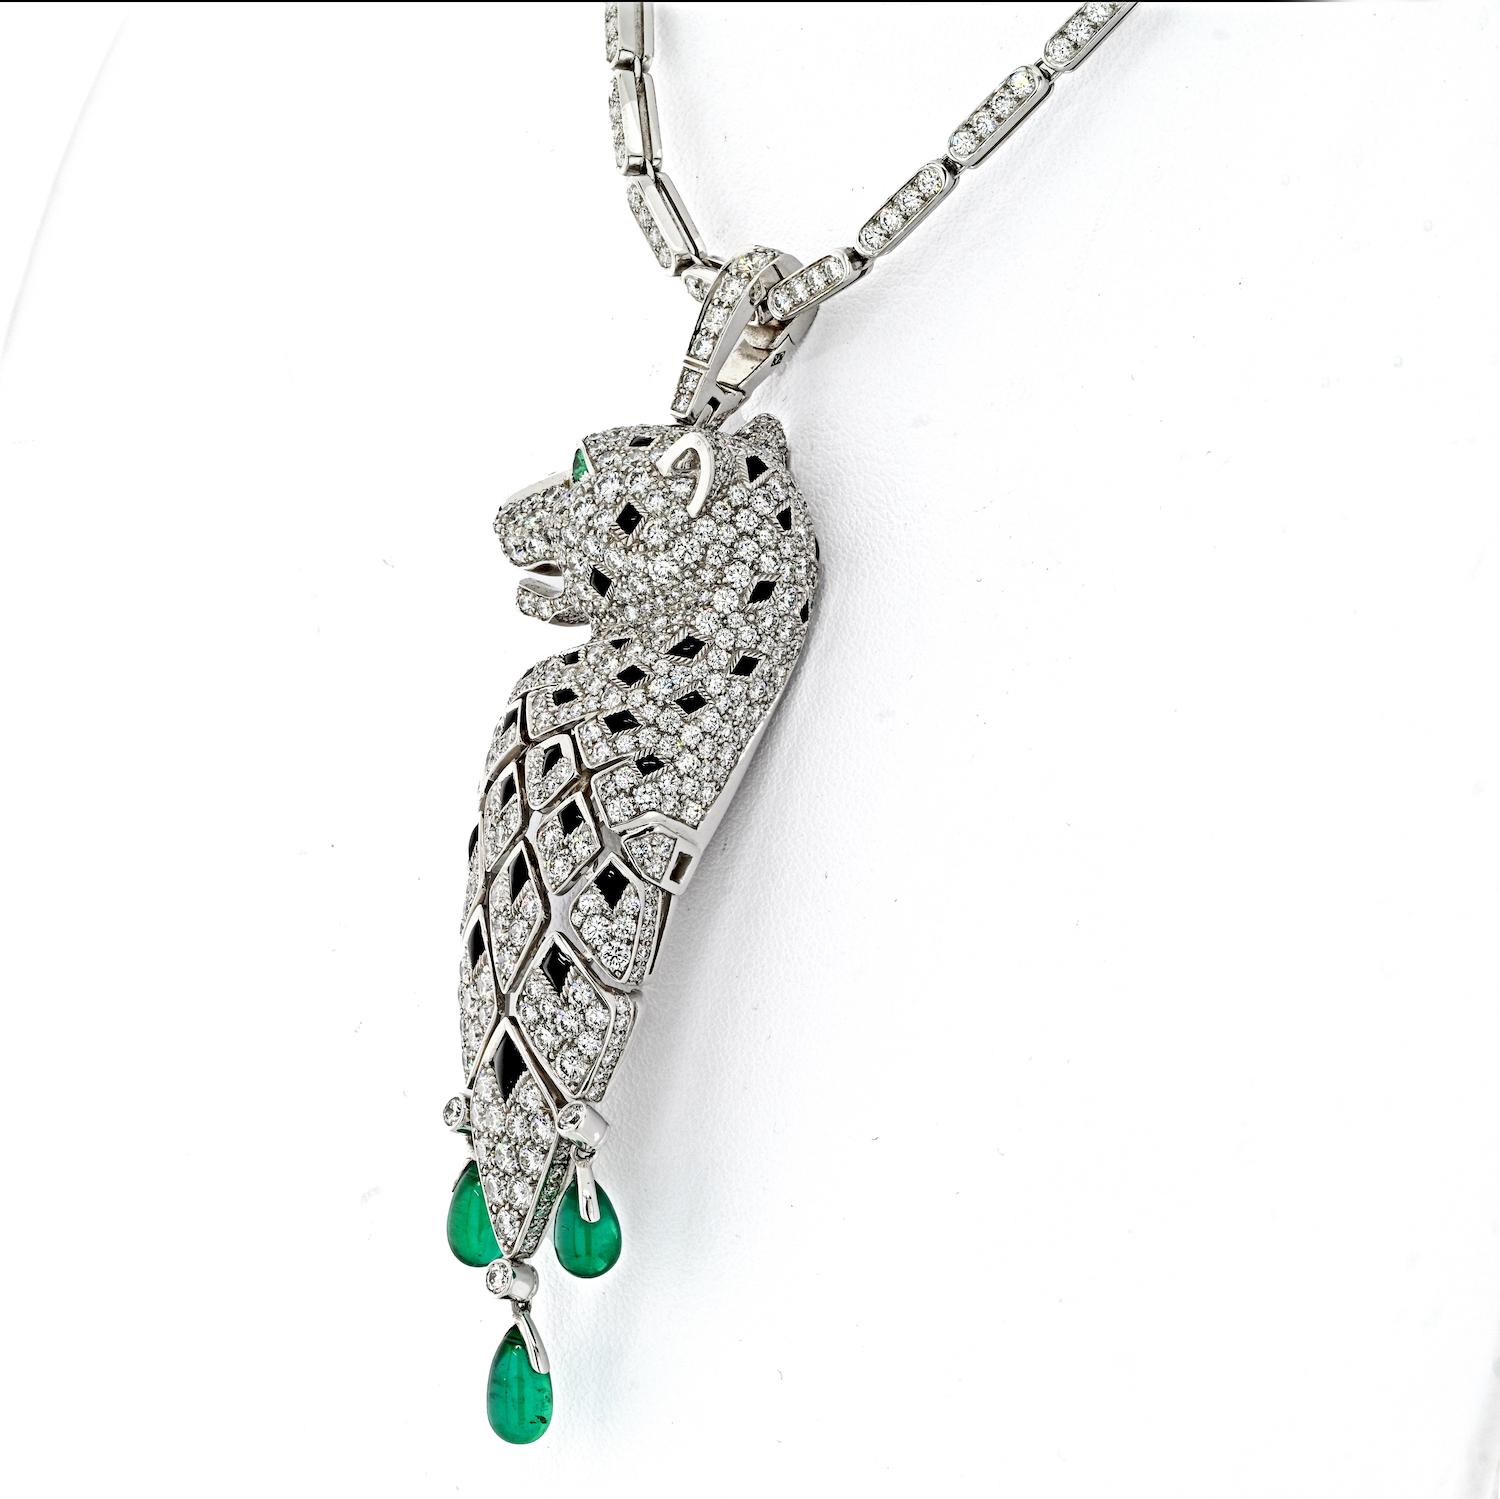 Cartier 18k White Gold Diamond, Emerald and Onyx Panthere Pendant Necklace 2